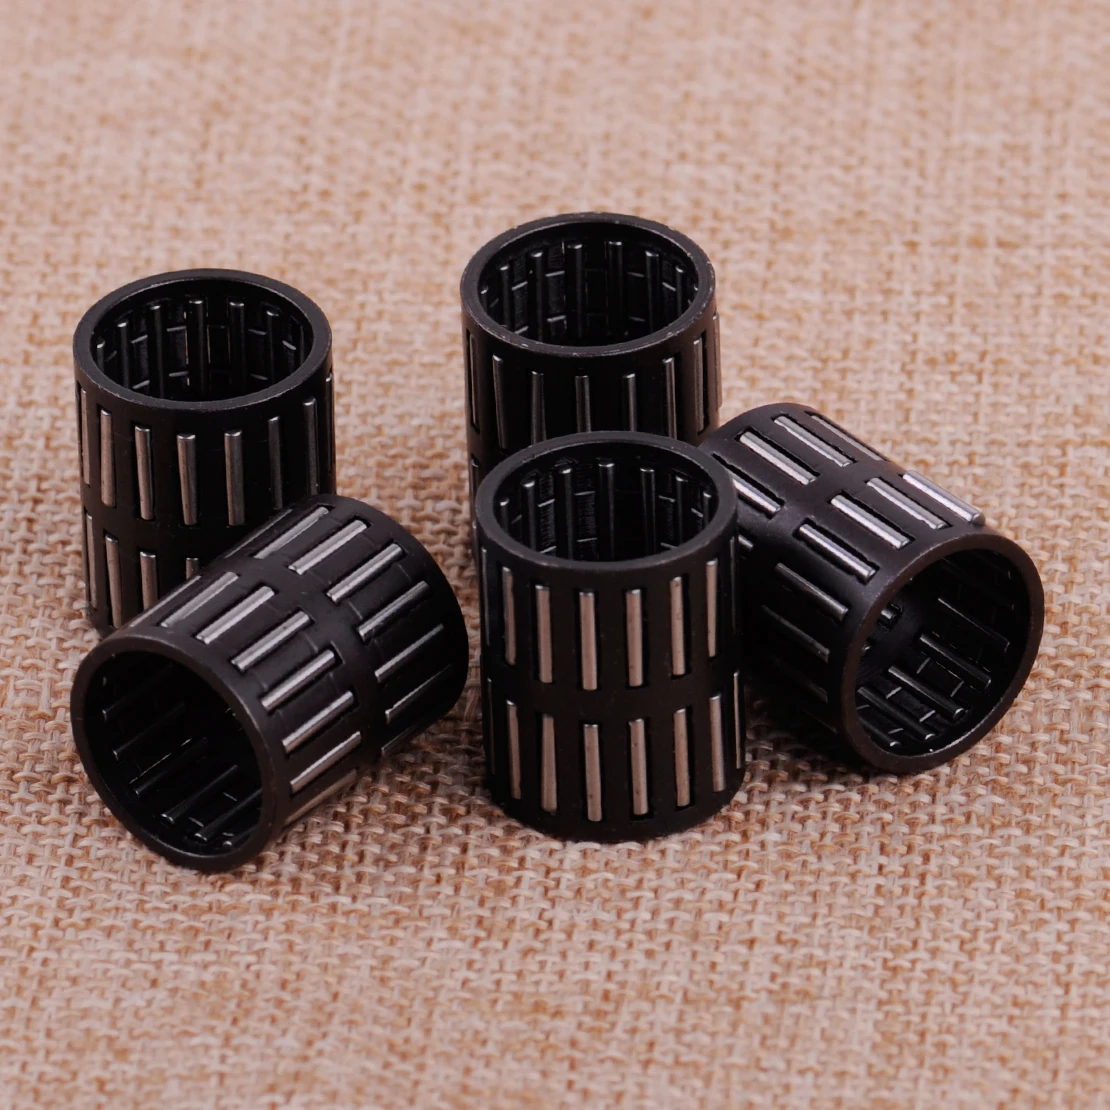 

LETAOSK High Quality Clutch Needle Cage Bearing Fit For Stihl 042 048 038 AV Super Magnum MS380 MS381 Chainsaw Accessories